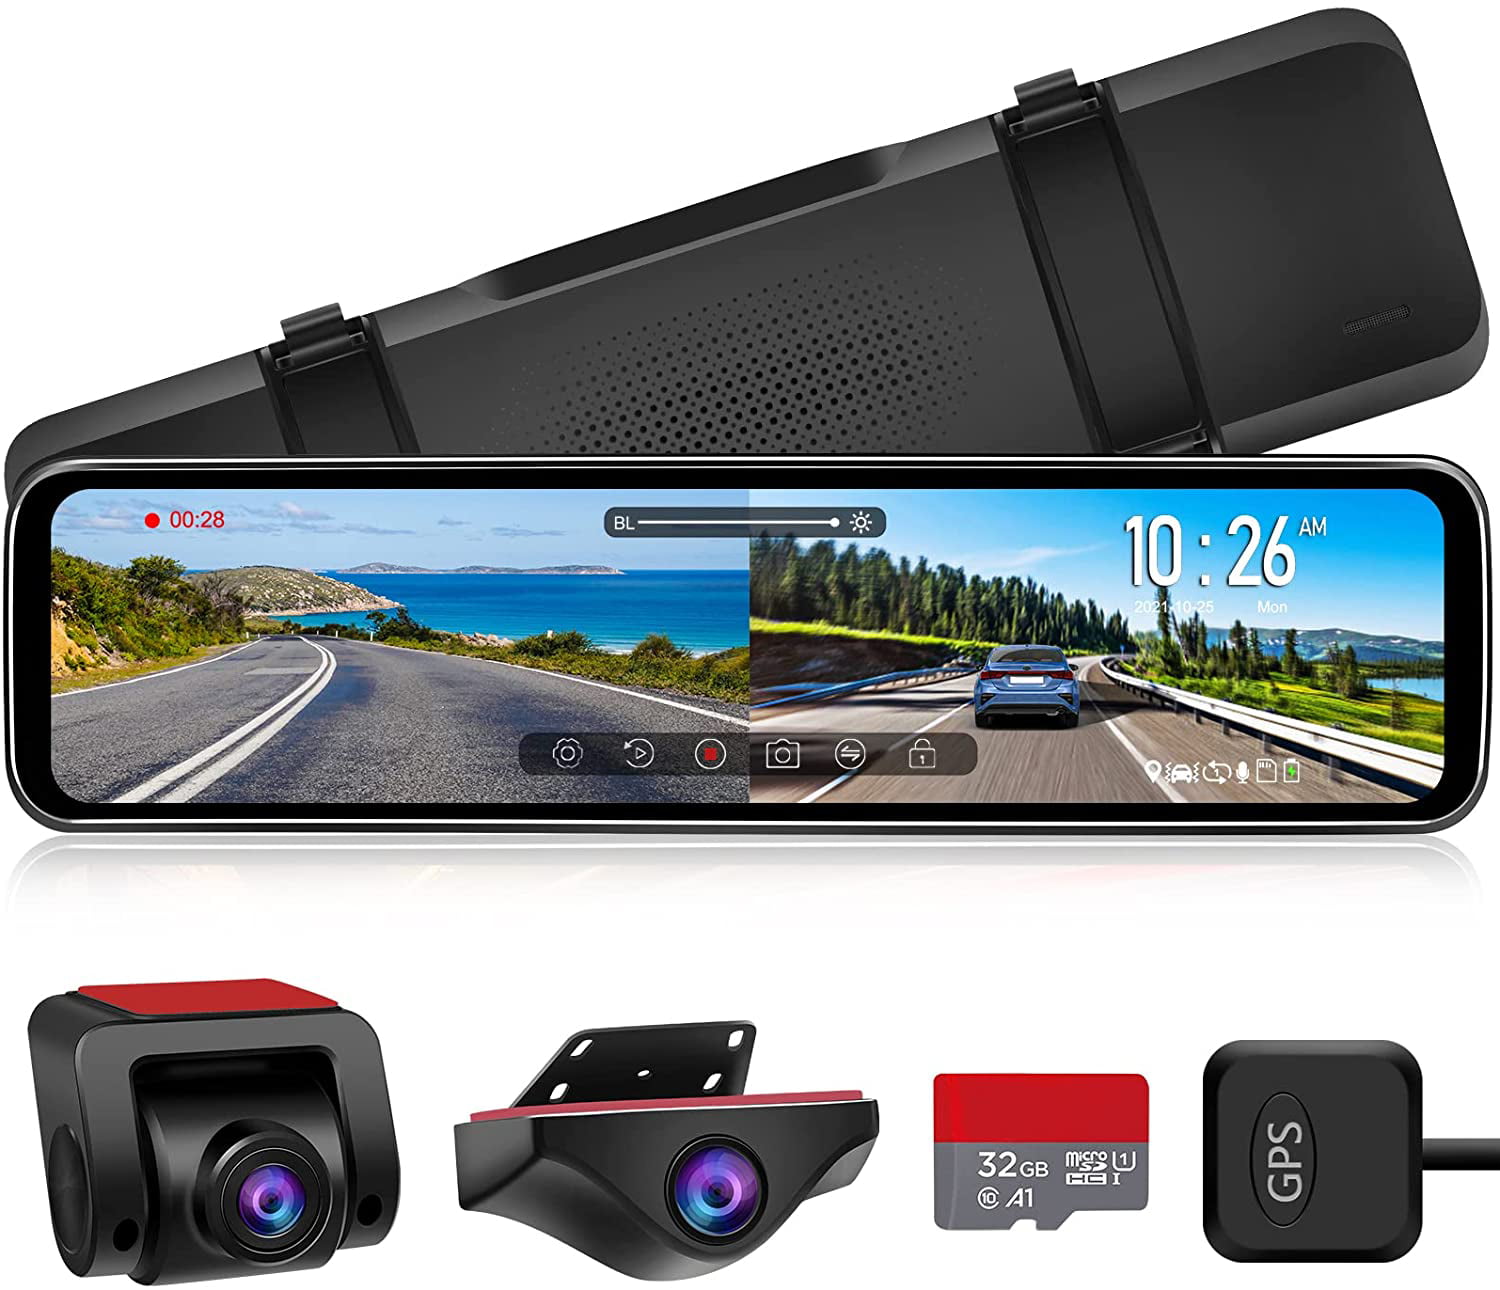 URVOLAX 12Mirror Dash Cam Voice Control,Car Backup Rear View Mirror Camera with Detached Front Lens,1296P Full HD Digital Rearview Dual Split Screen,Night Vision Sony Sensor,Smart Parking Assist,GPS 